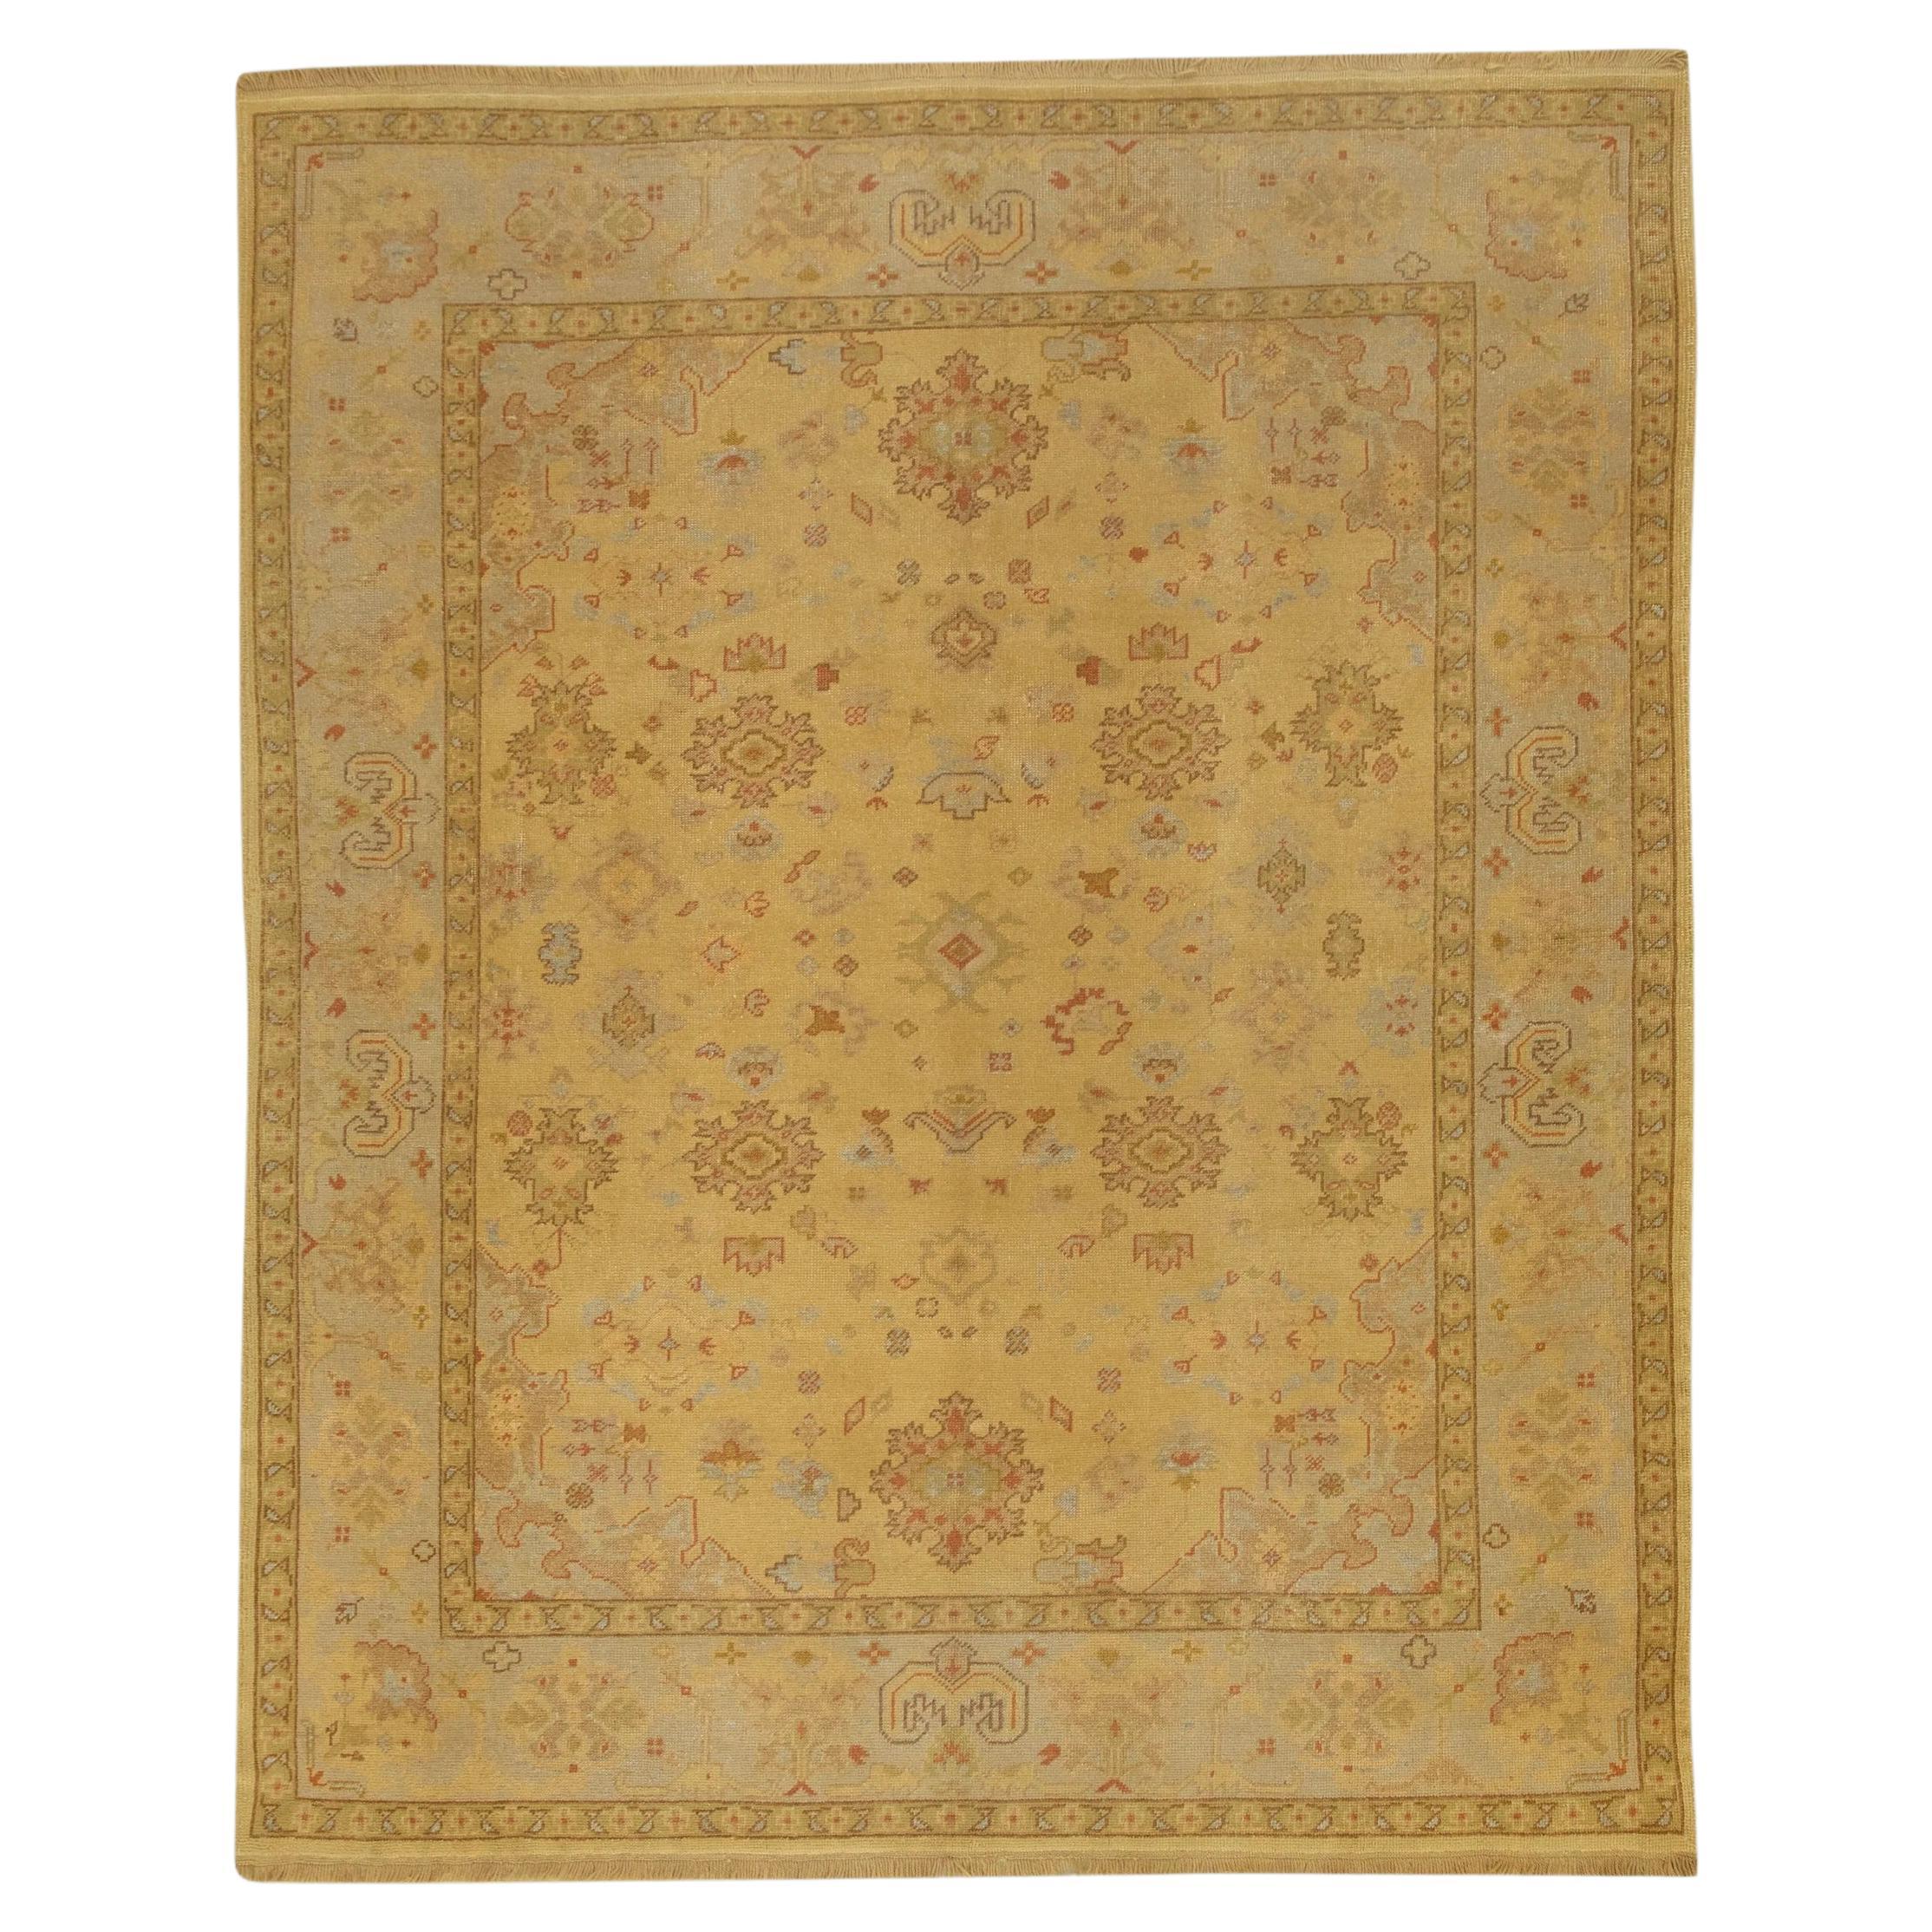 Yellow & Red Floral Design Handwoven Wool Turkish Oushak Rug 8' x 9'6"